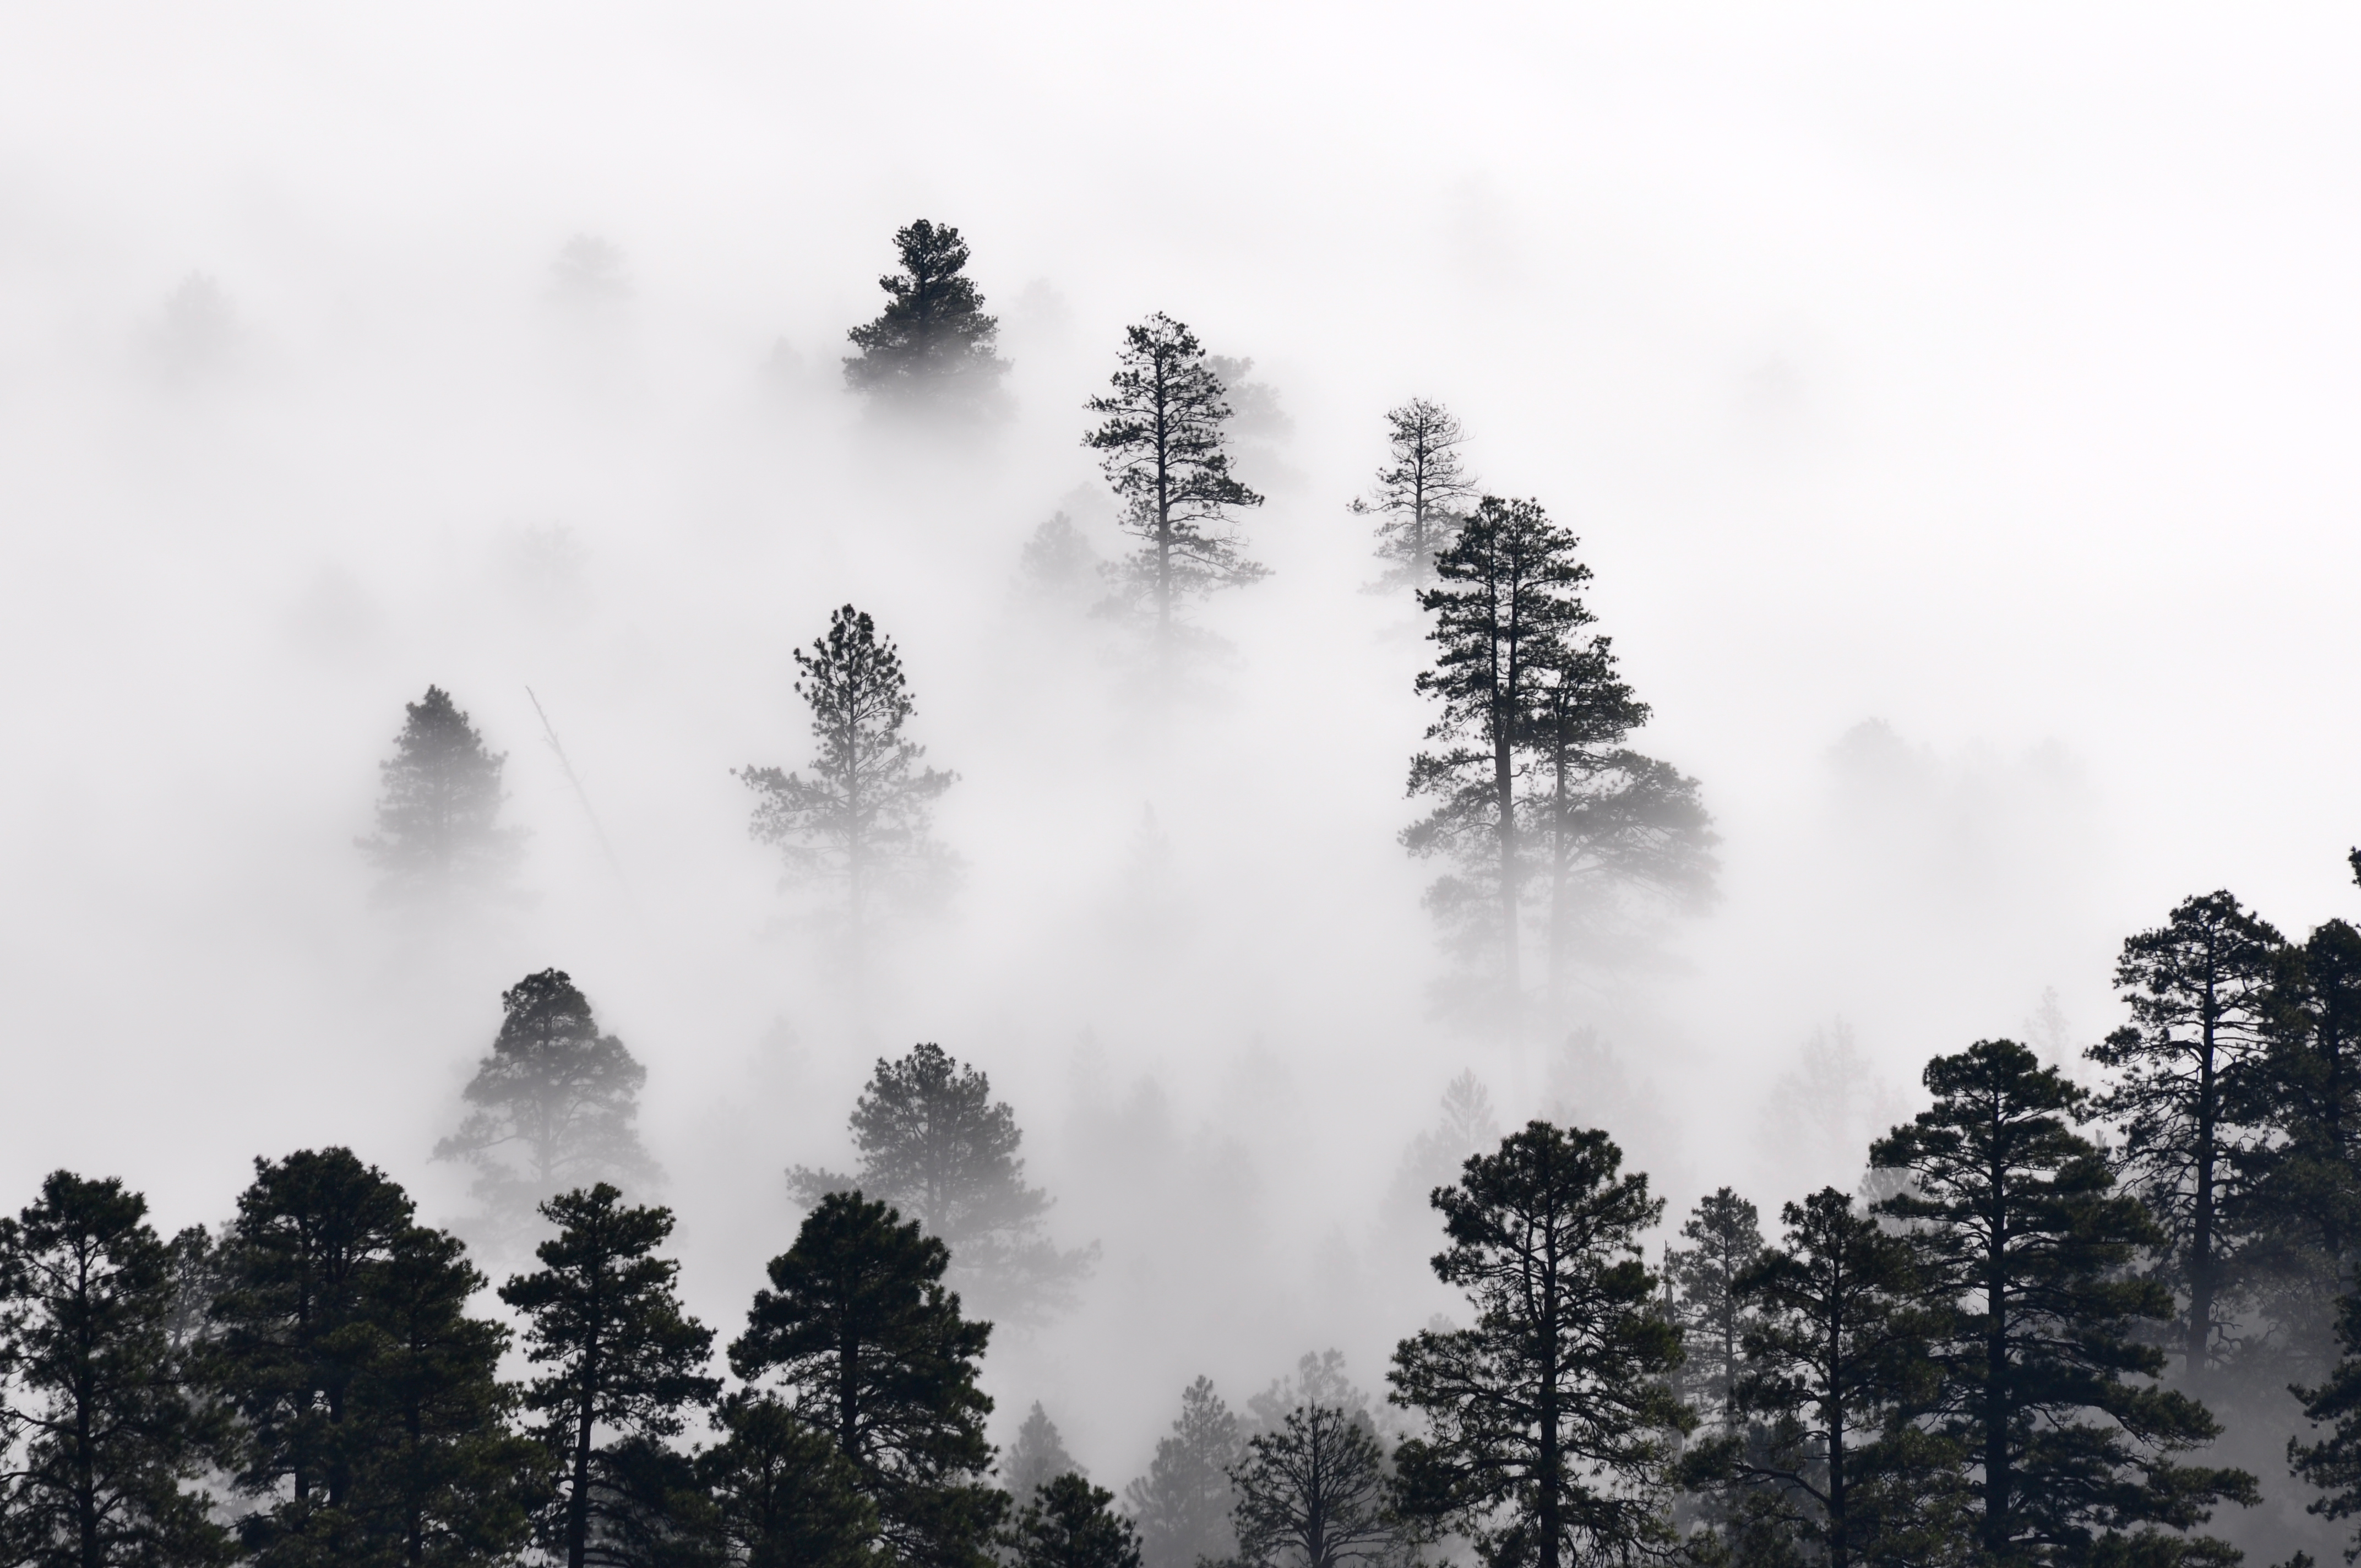 Trees in the mist (7699666560)